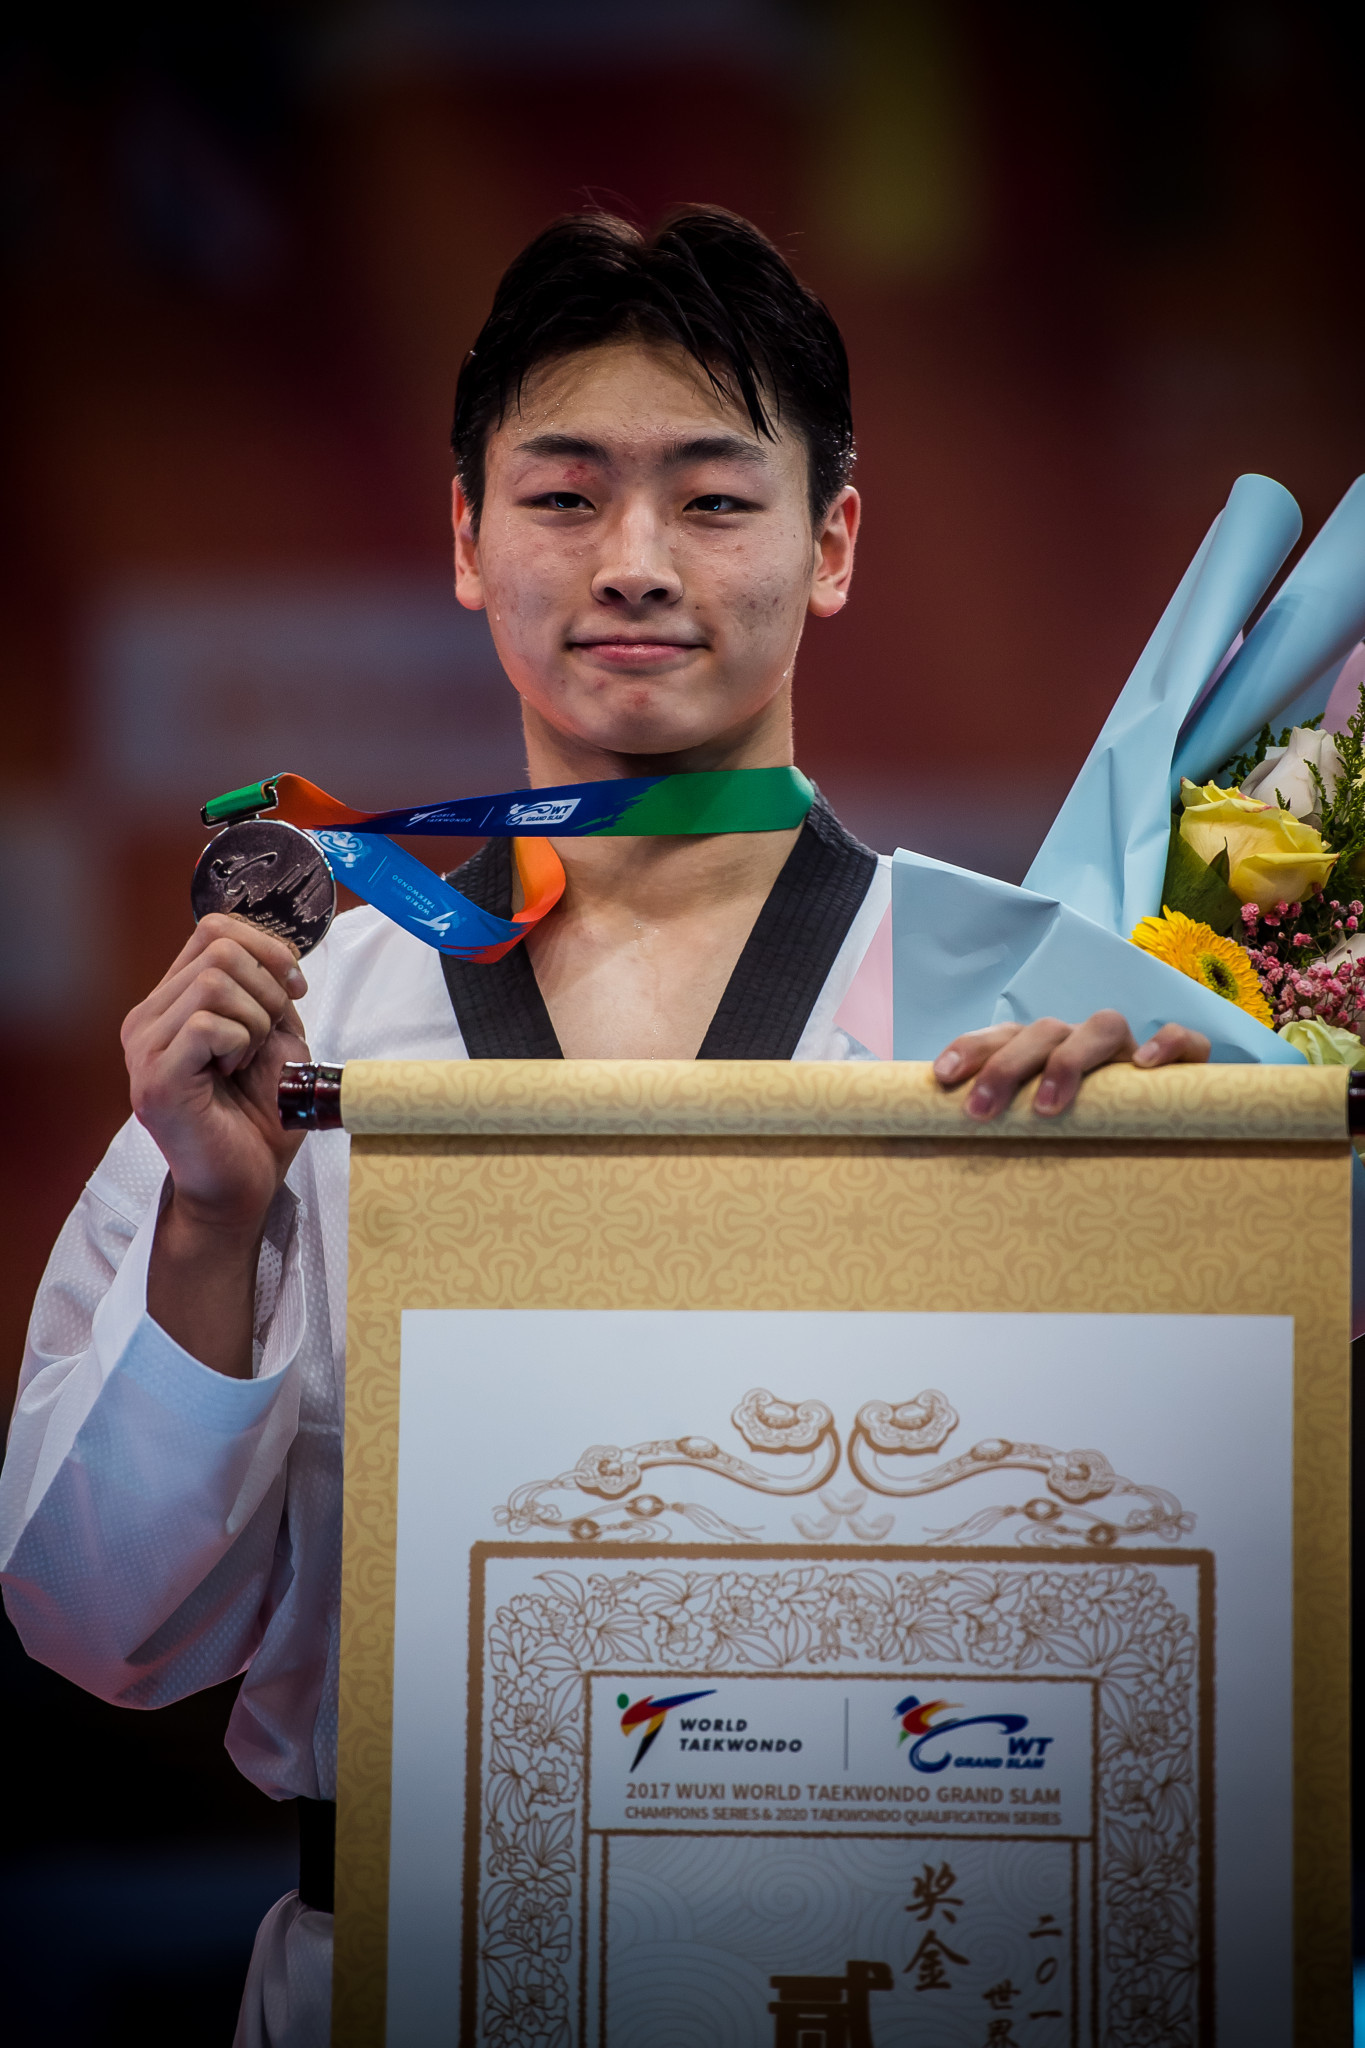 Nineteen-year-old Namgoong had to settle for the silver medal ©World Taekwondo